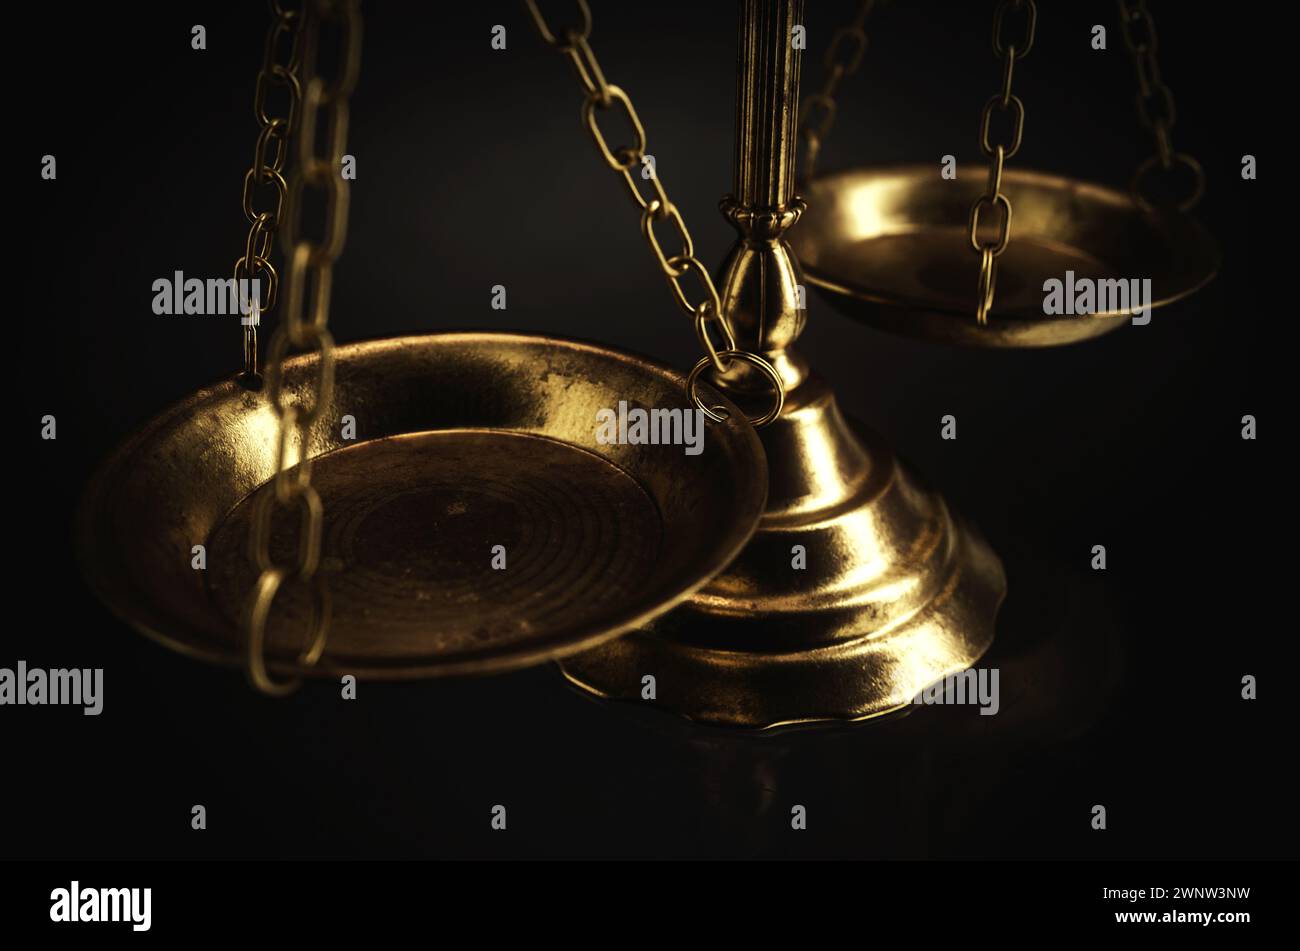 Ornate brass justice scales on a dark isolated background - 3D render Stock Photo